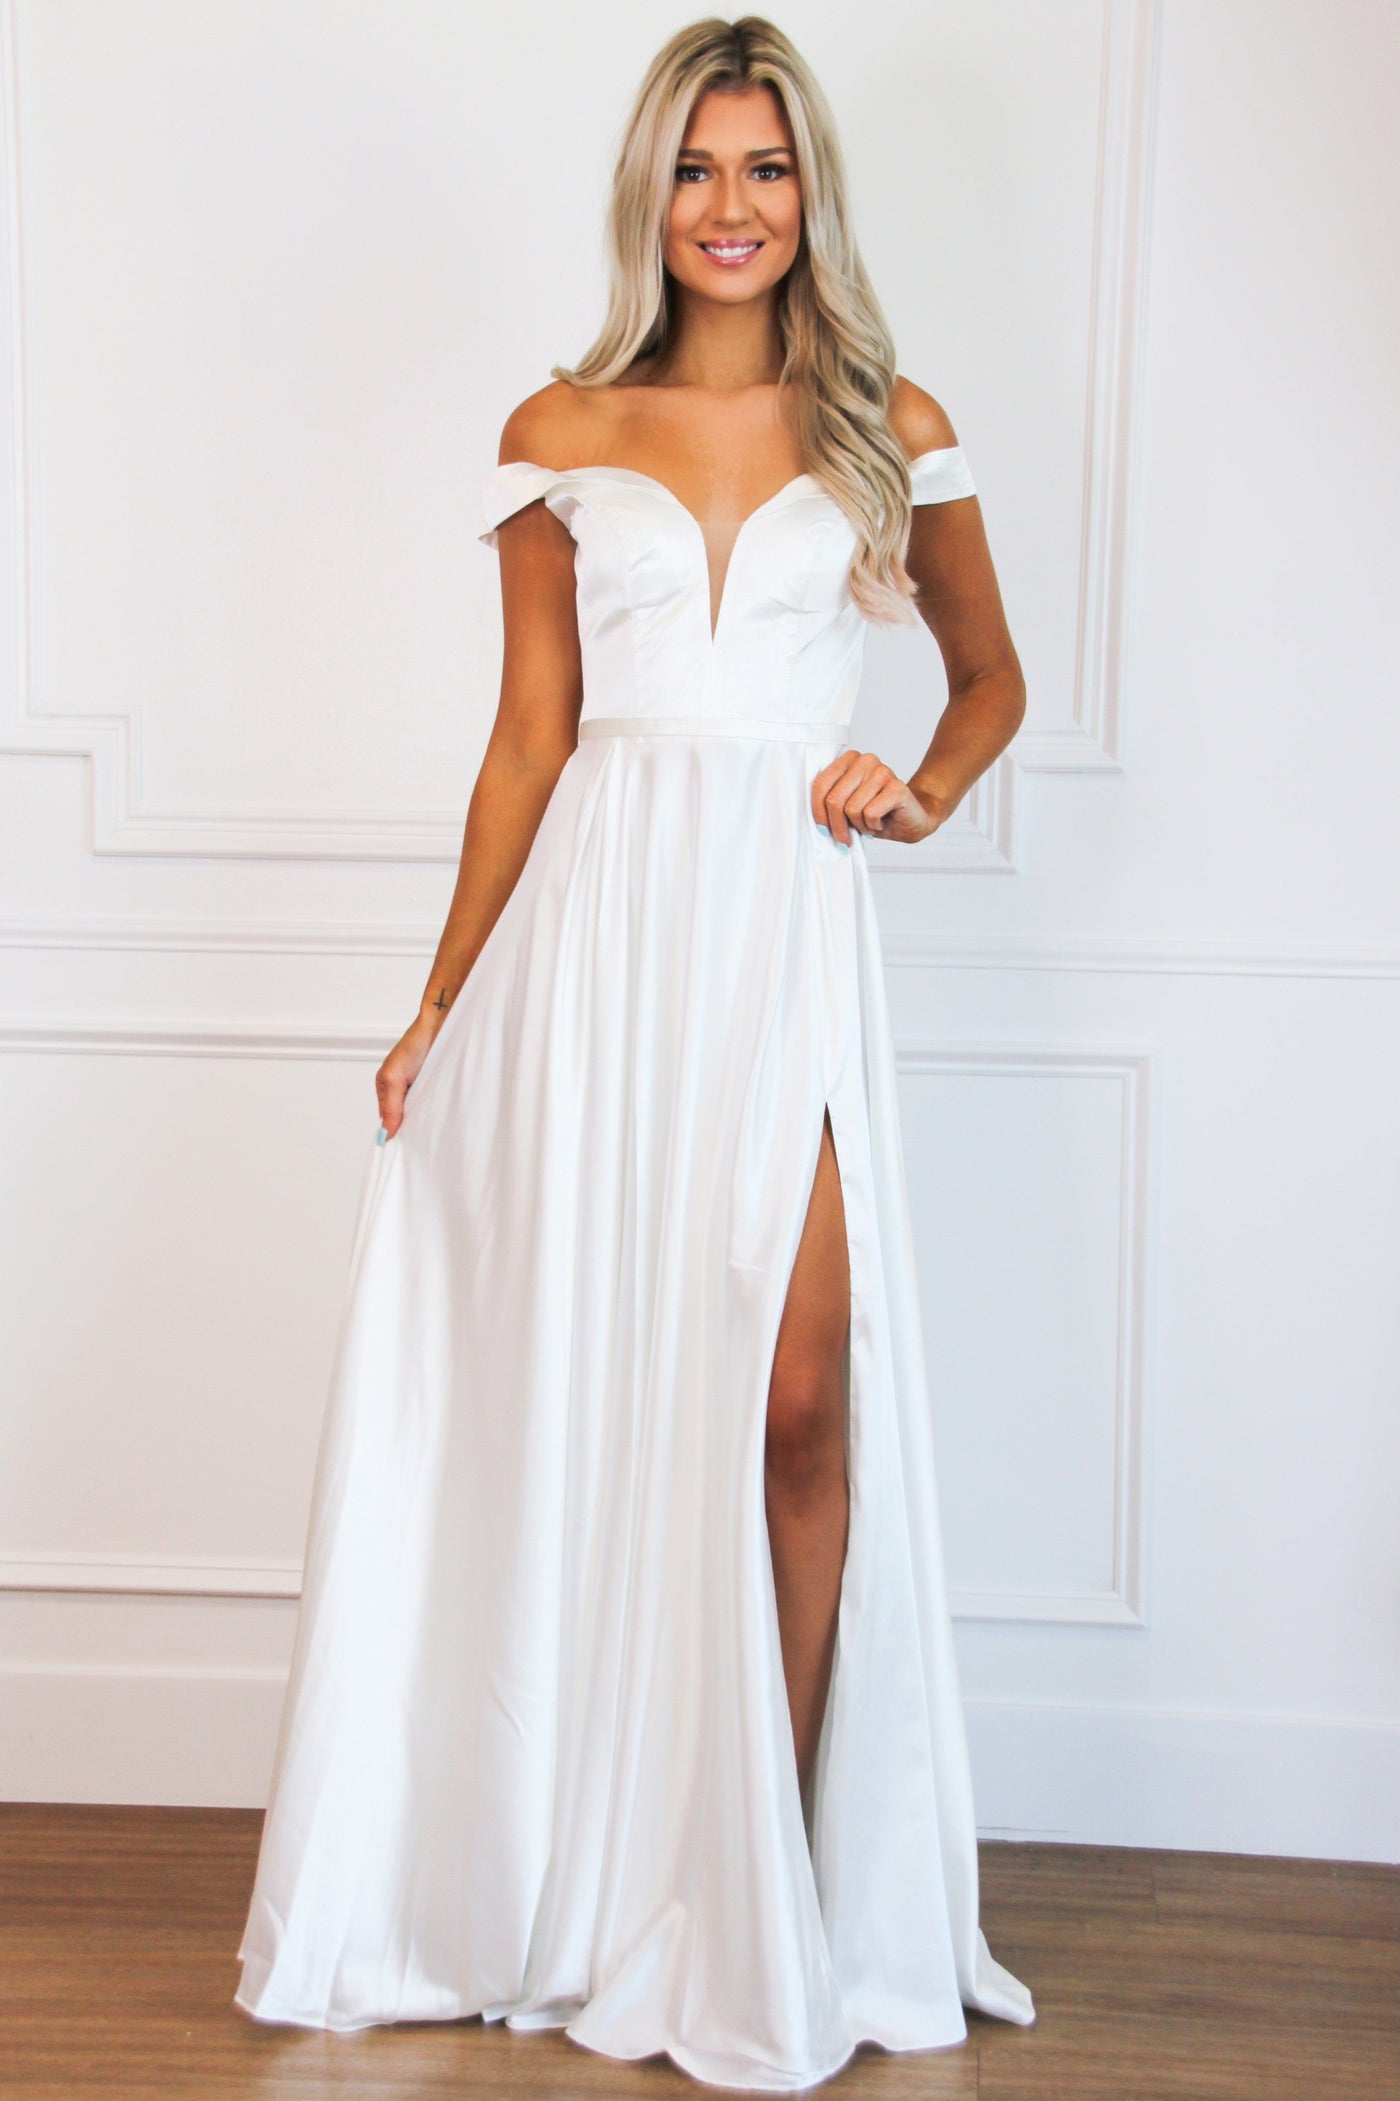 Love at First Sight Satin Off Shoulder Wedding Dress: White - Bella and Bloom Boutique